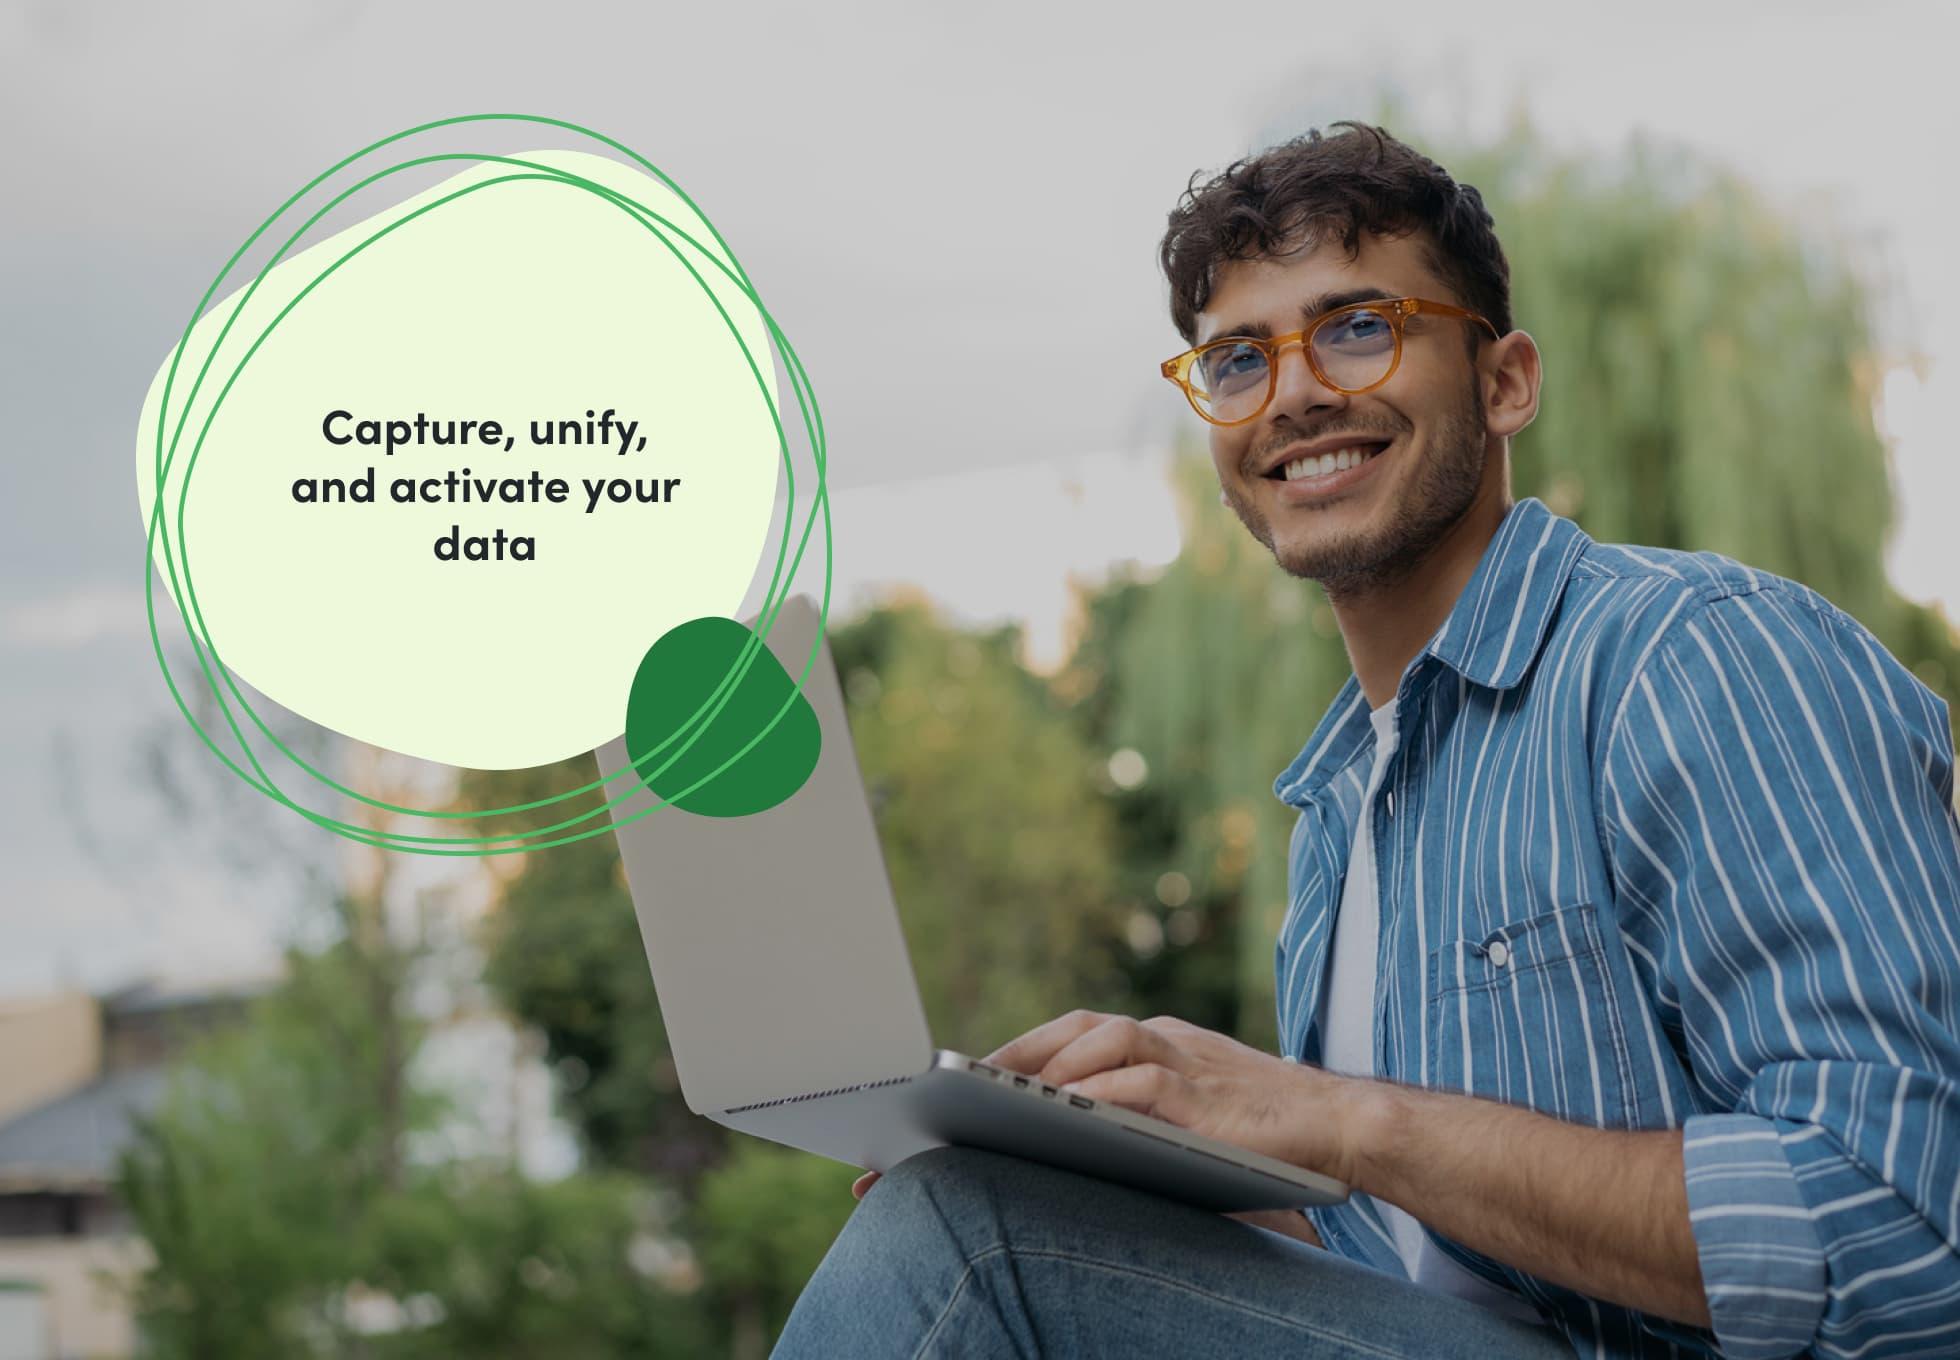 A person smiling with a laptop resting on their knee. A sentence is imposed overtop that says, "Capture, unify, and activate your data."